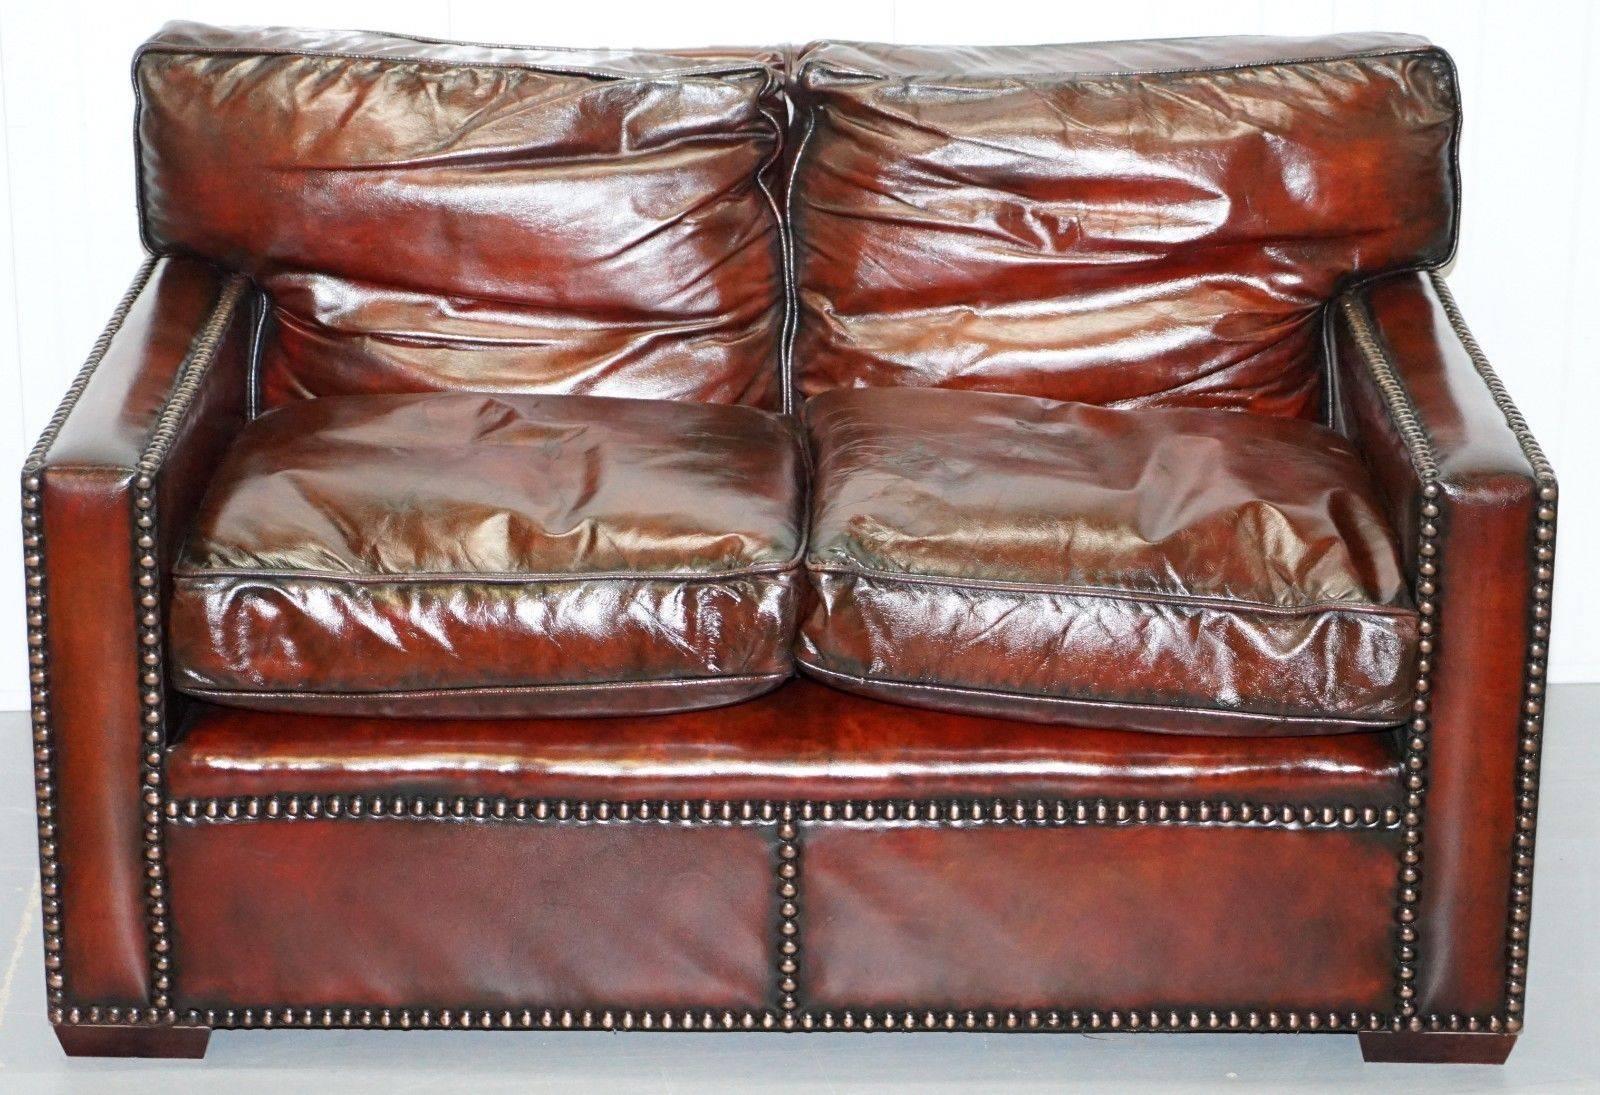 We are delighted to offer for sale this stunning fully restored Bordeaux leather Gentleman’s club sofa part of a large suite with a great history

This piece is part of a suite, all restored to the same finish and standard, I have two two-seat